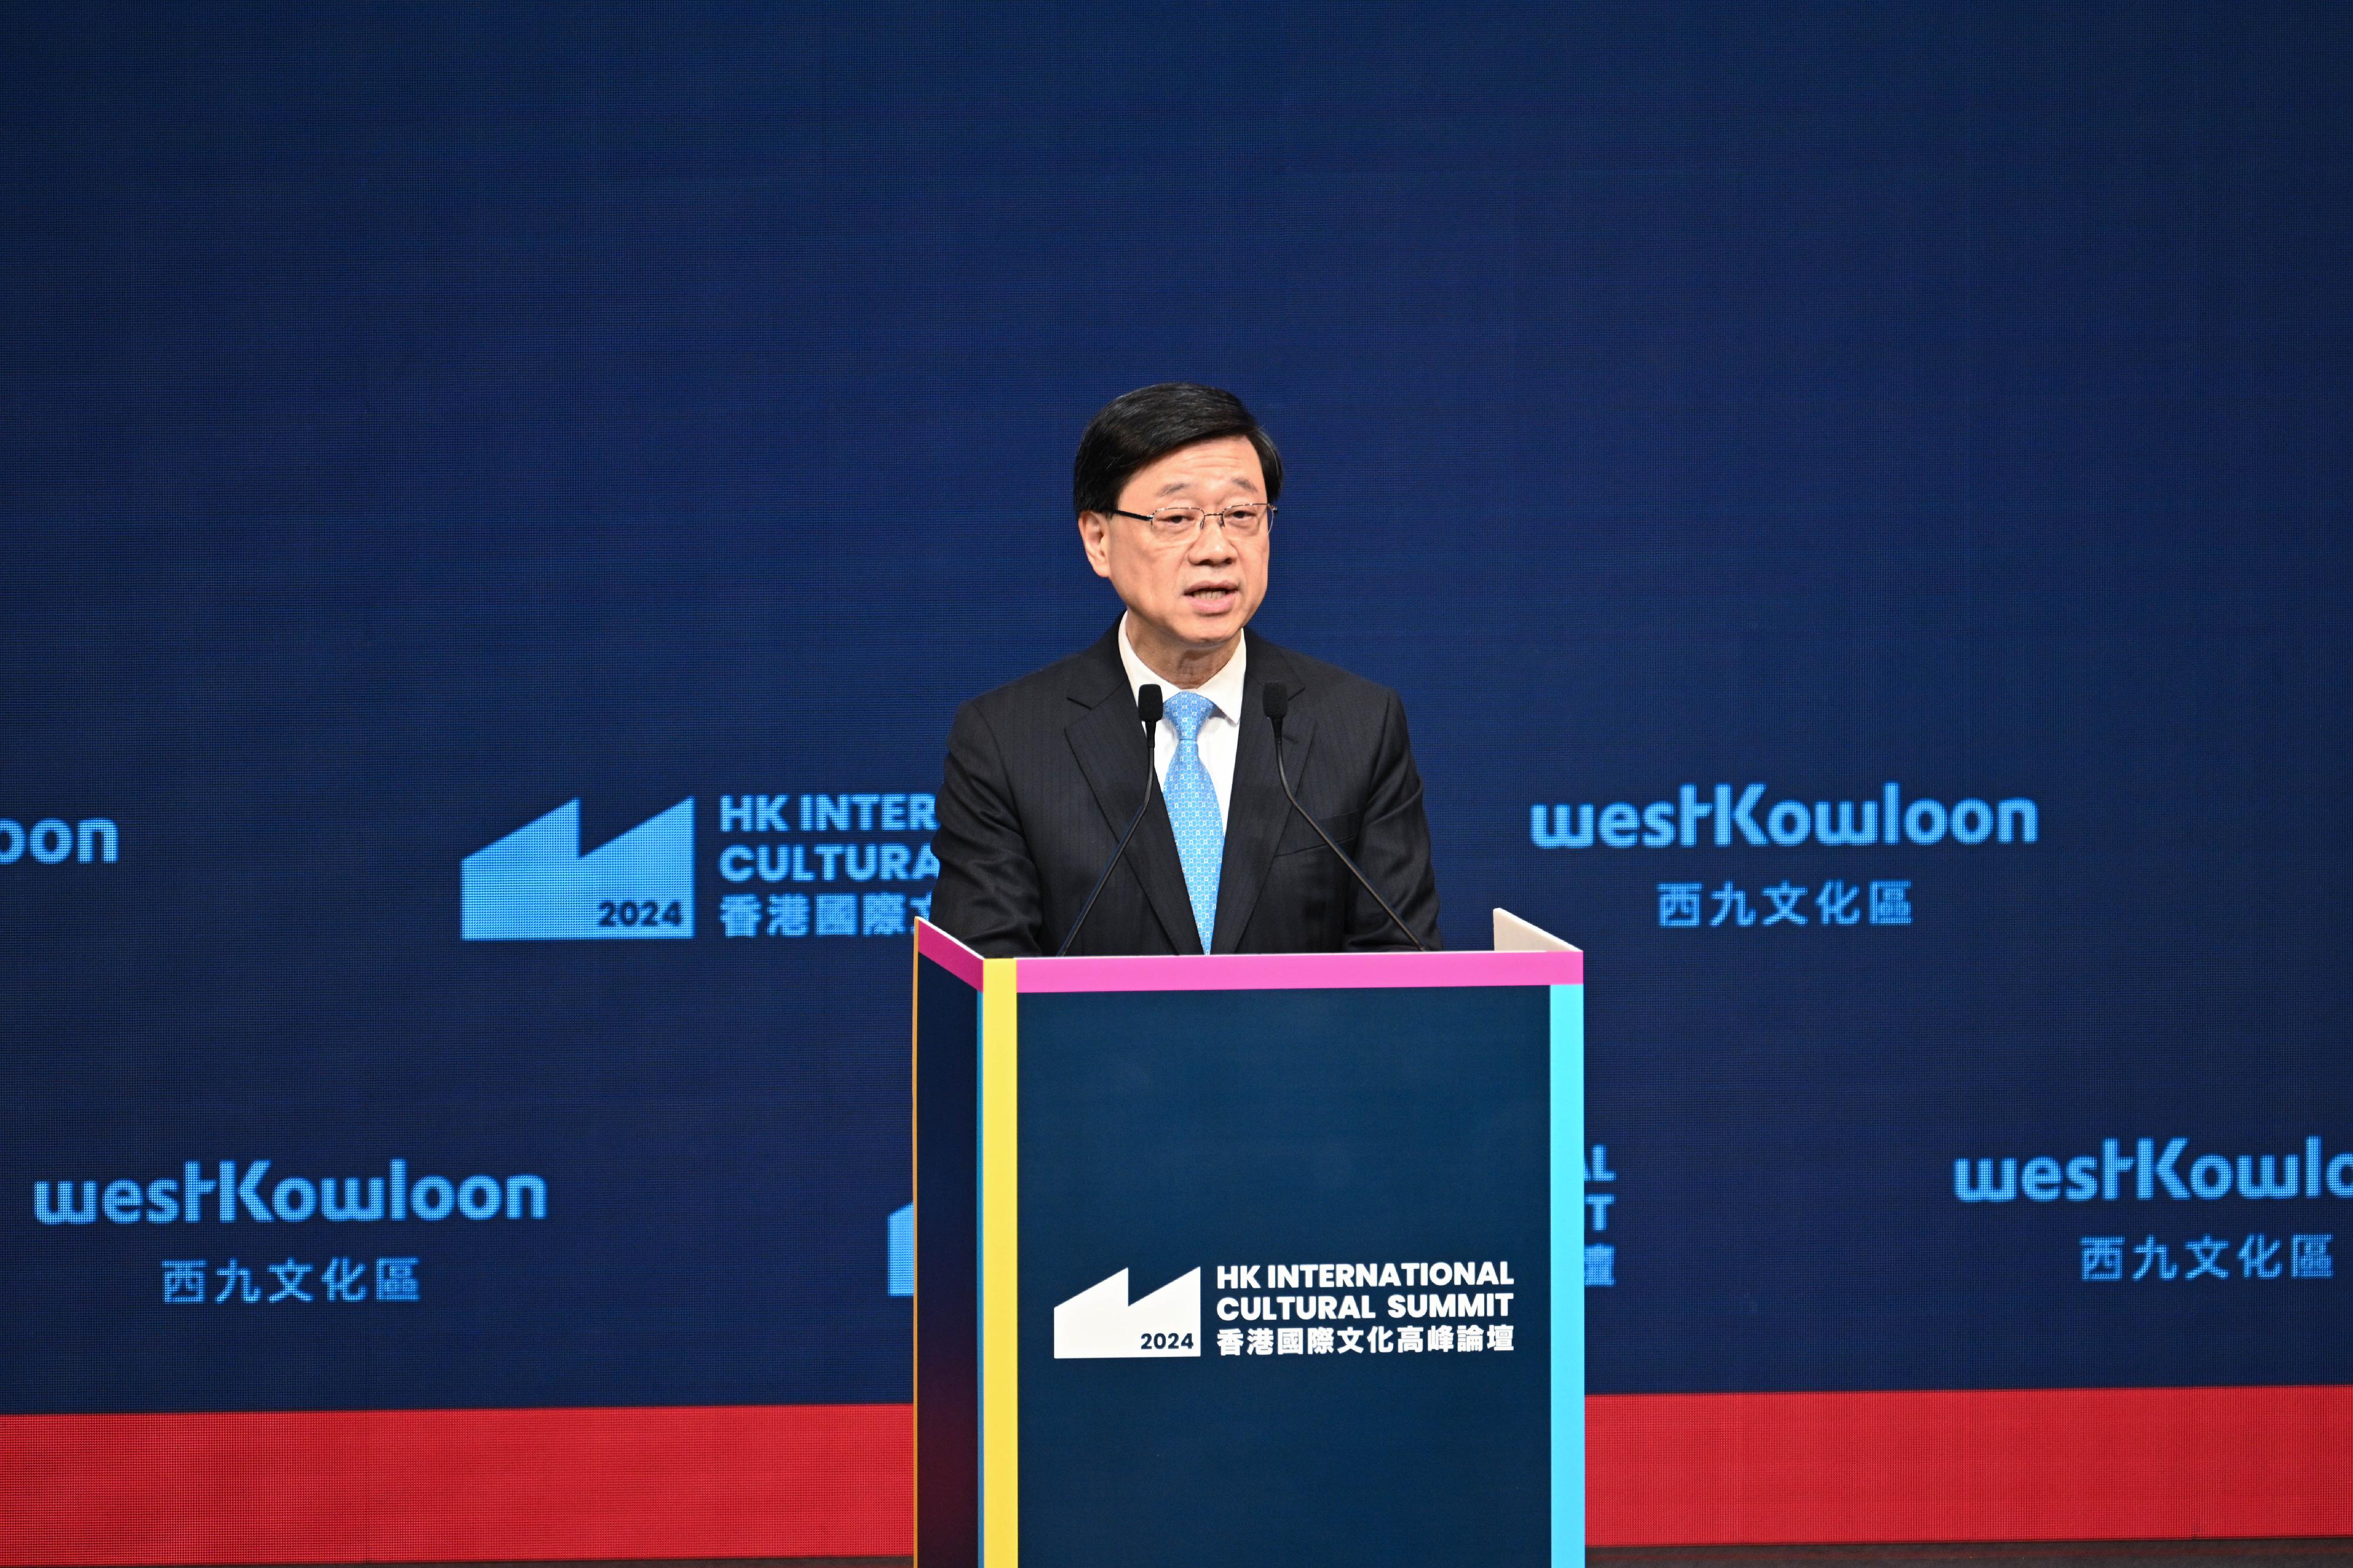 The Chief Executive, Mr John Lee, speaks at the Hong Kong International Cultural Summit held by the West Kowloon Cultural District Authority today (March 25).